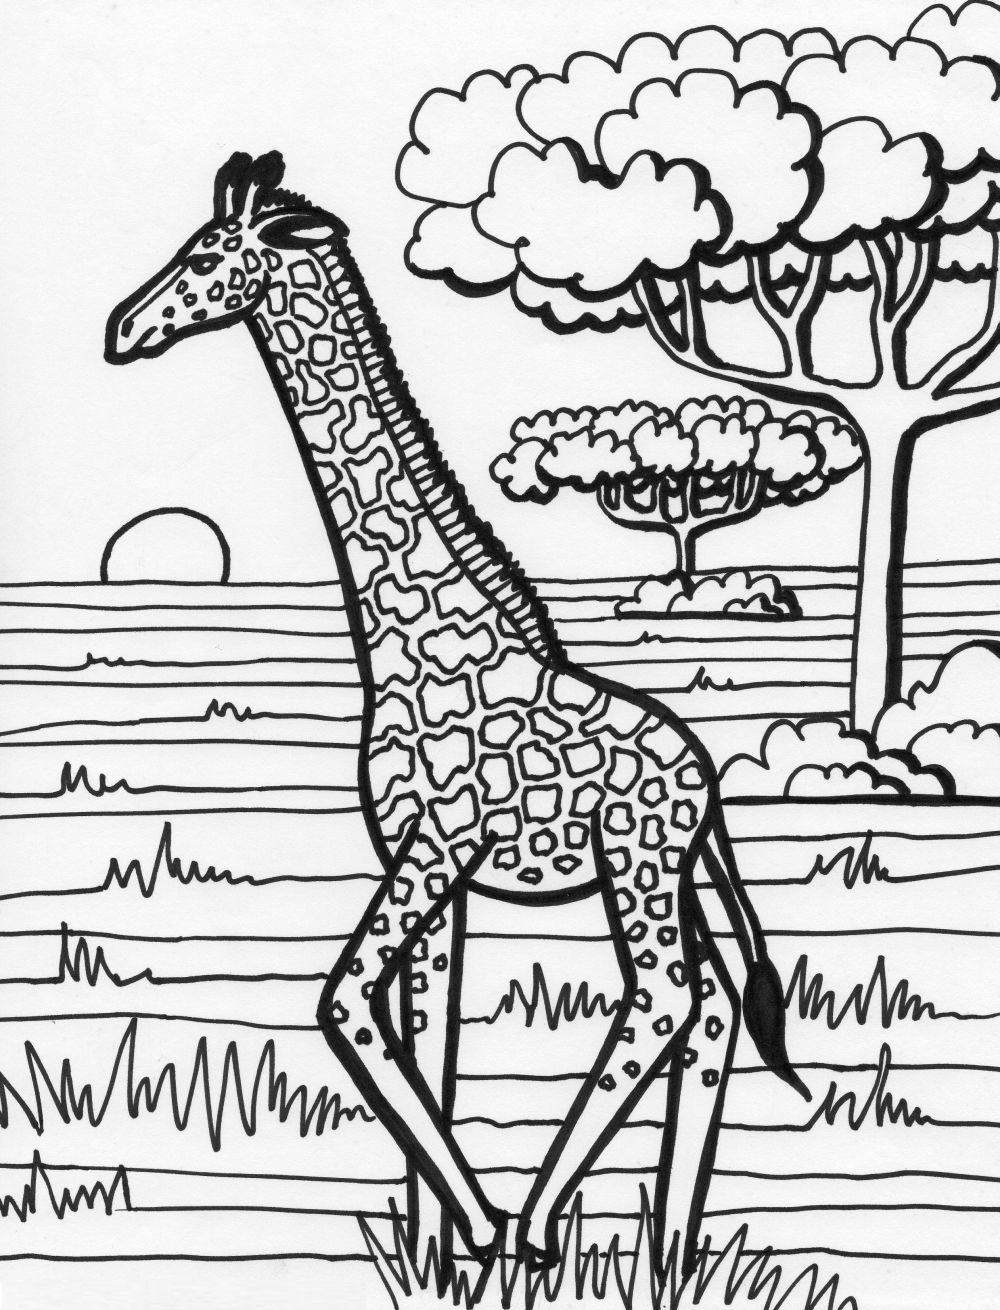 Download Free Printable Giraffe Coloring Pages For Kids